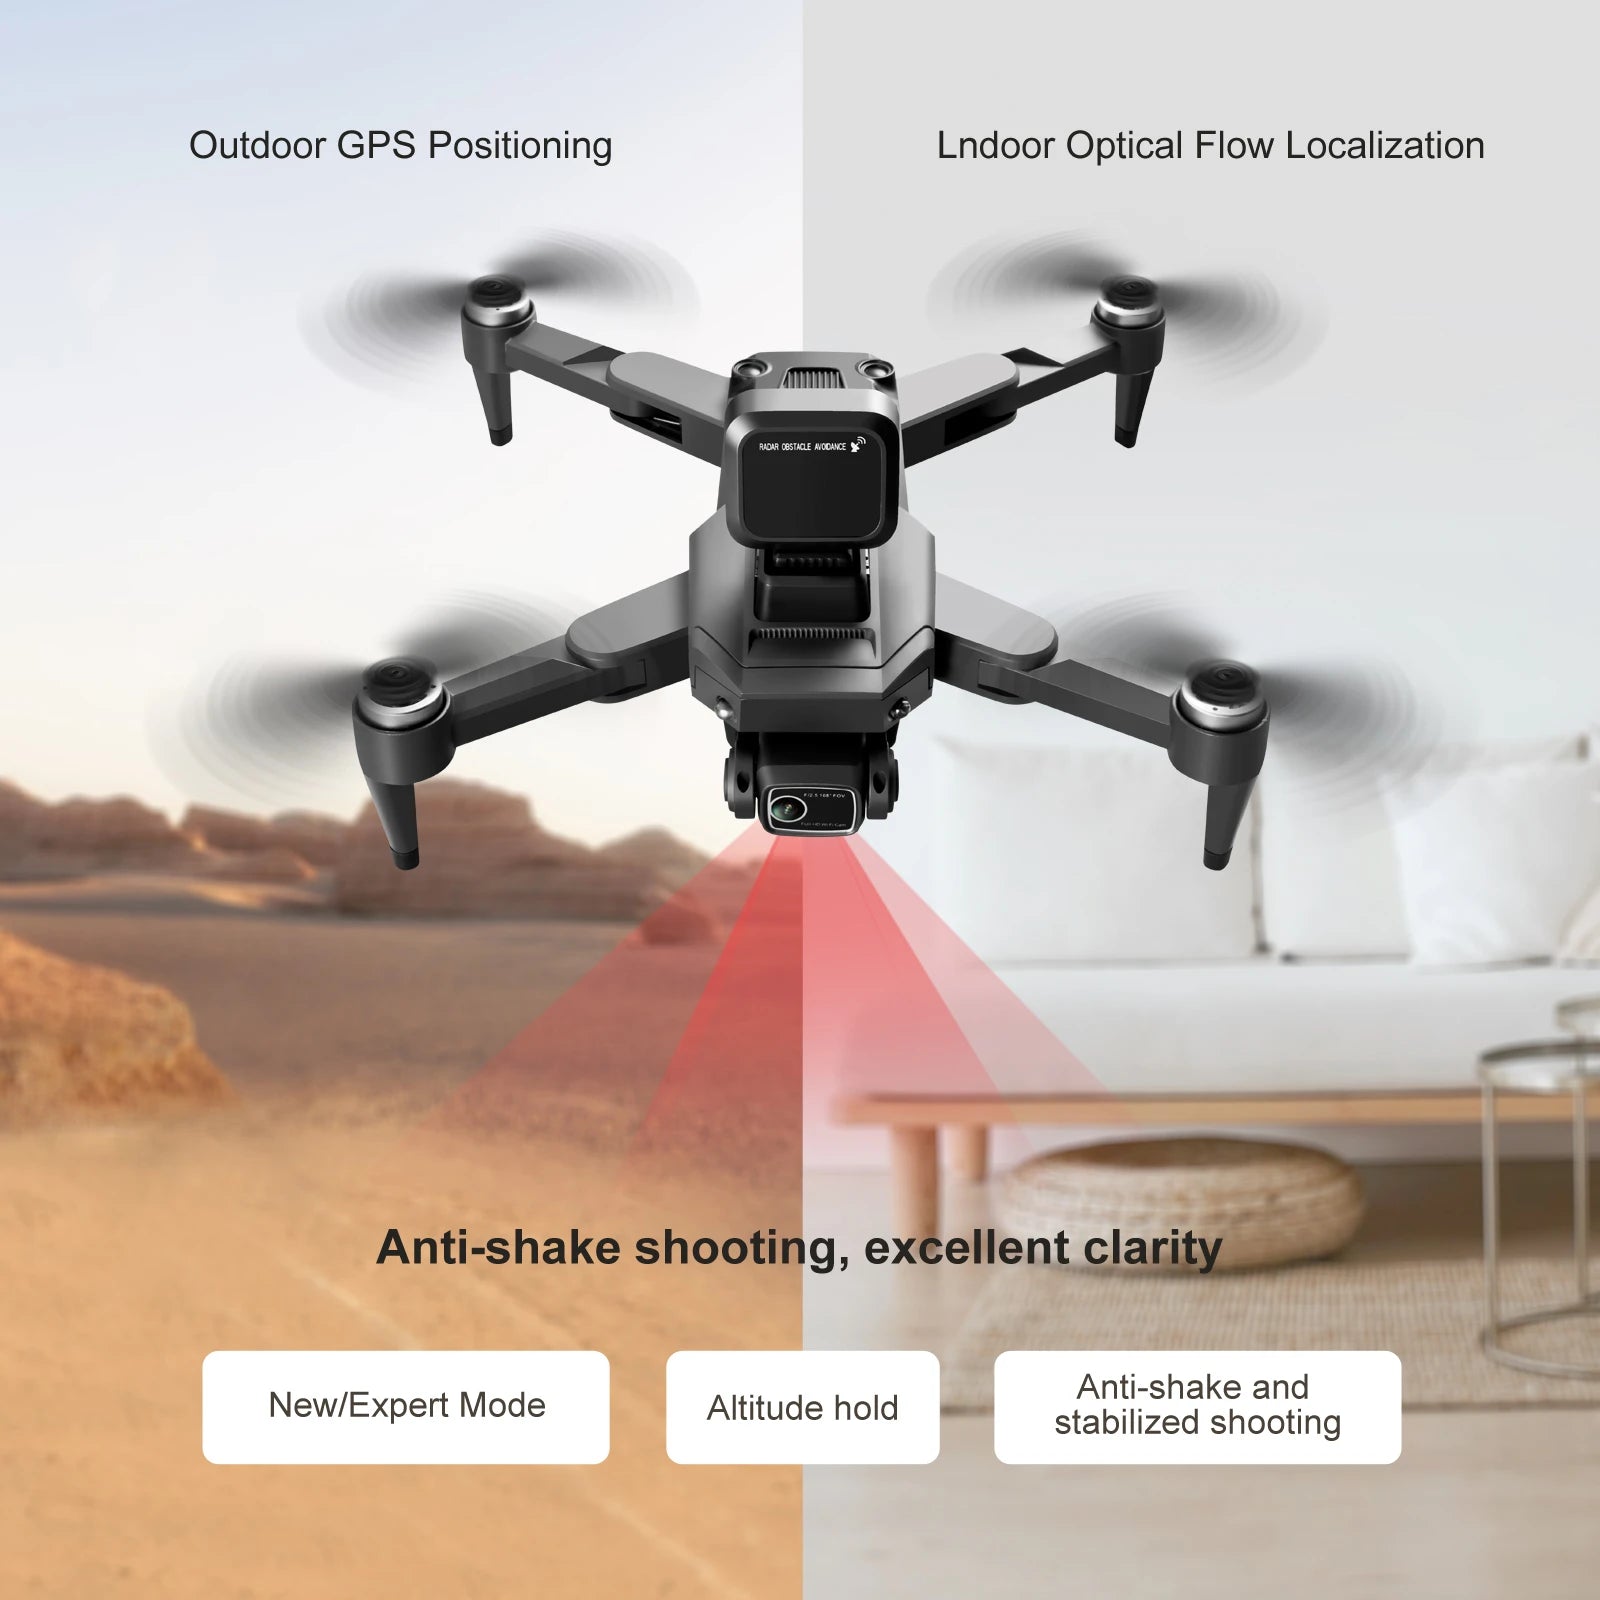 S109 GPS Drone, Outdoor GPS Positioning Lndoor Optical Flow Localization aotr